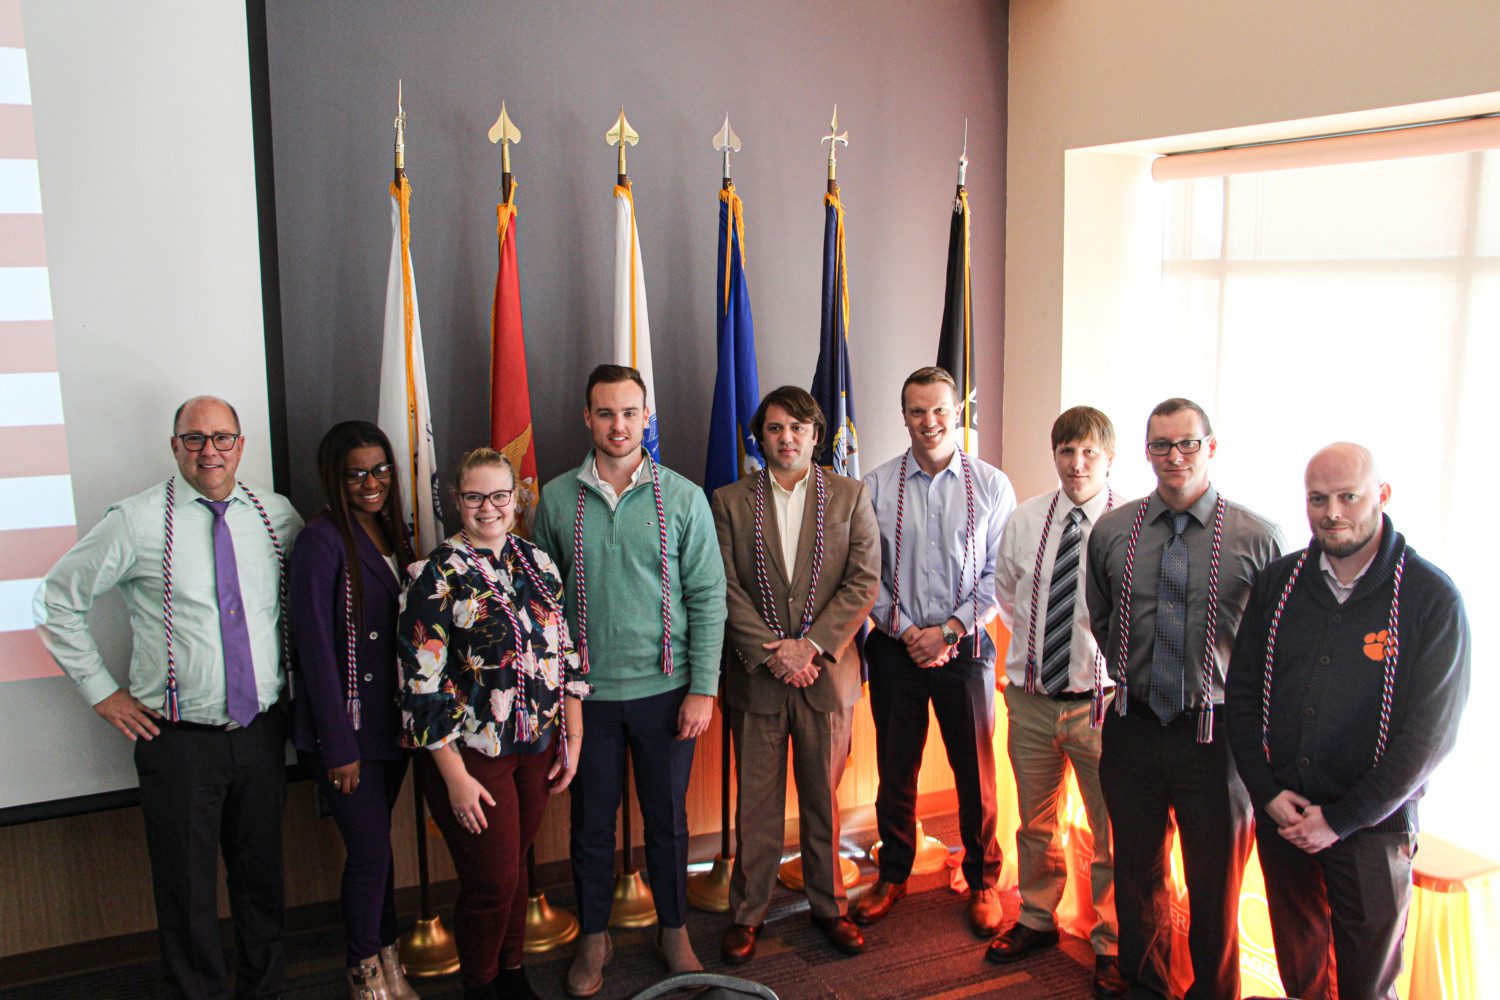 Members of the December 2019 student veteran graduating class were honored in a special ceremony in Hendrix Student Center on Wednesday, Dec. 18.